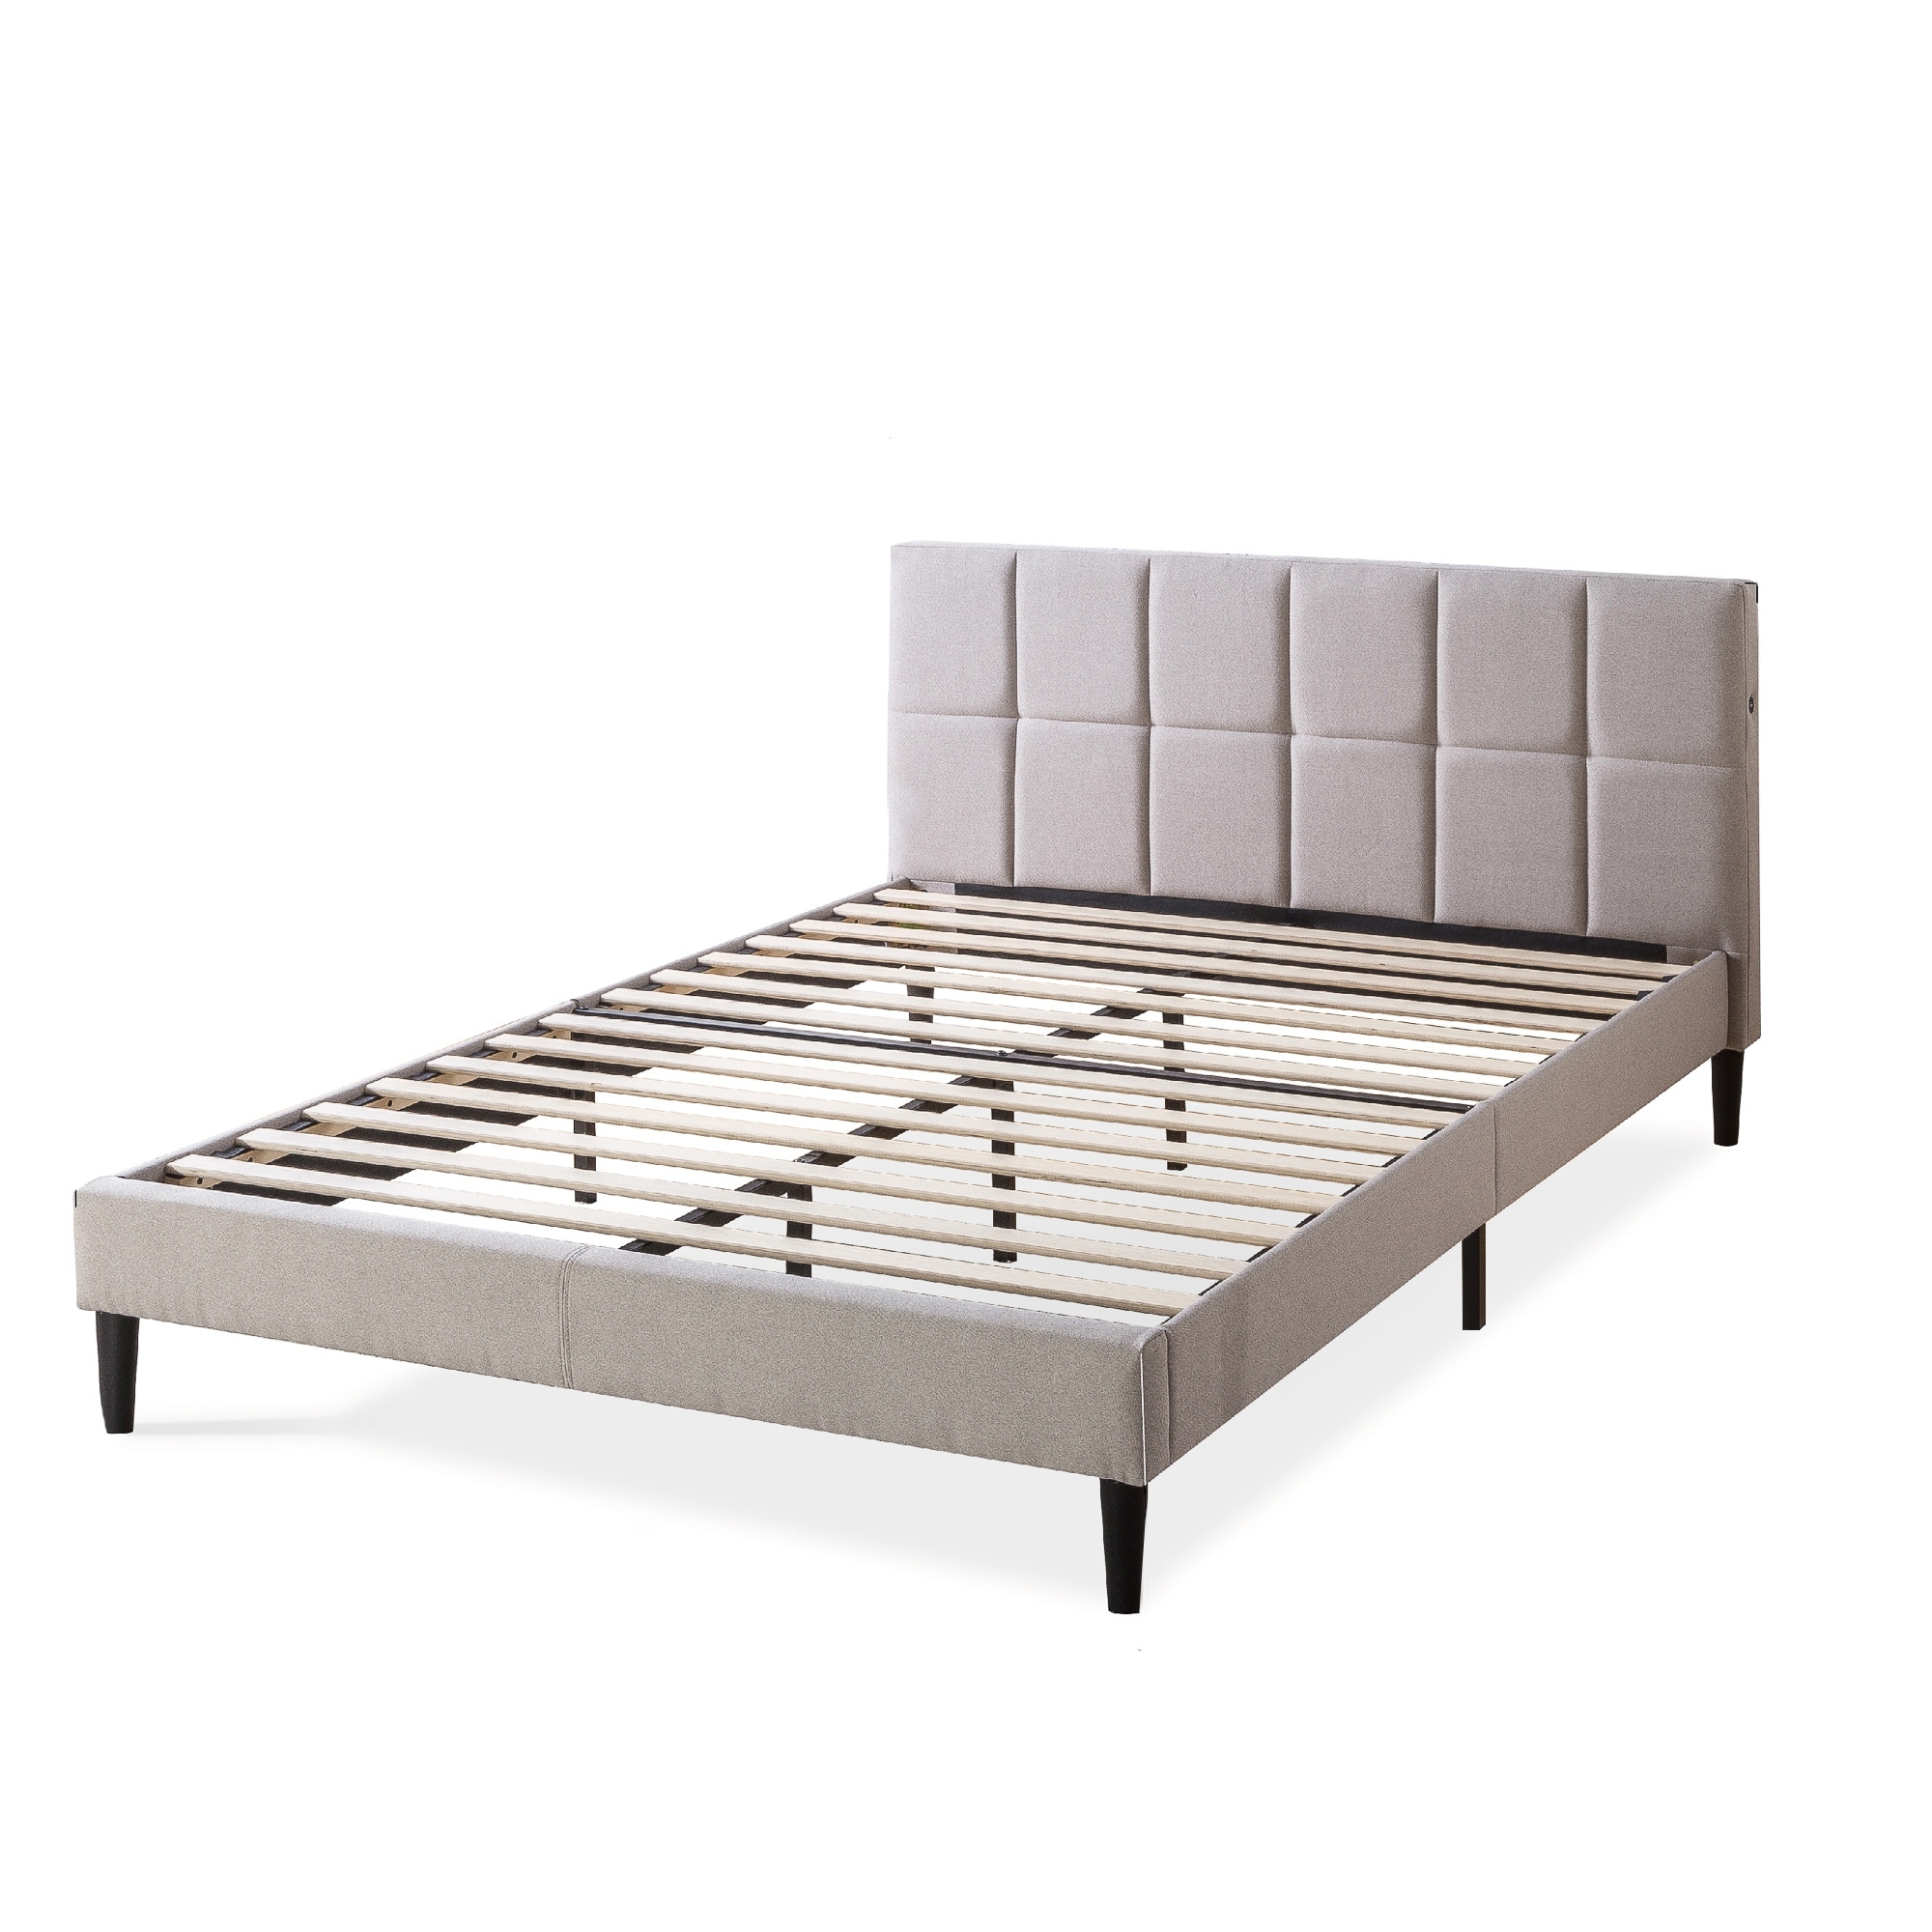 Priage By Zinus Upholstered Stitched Platform Bed With Usb Ports